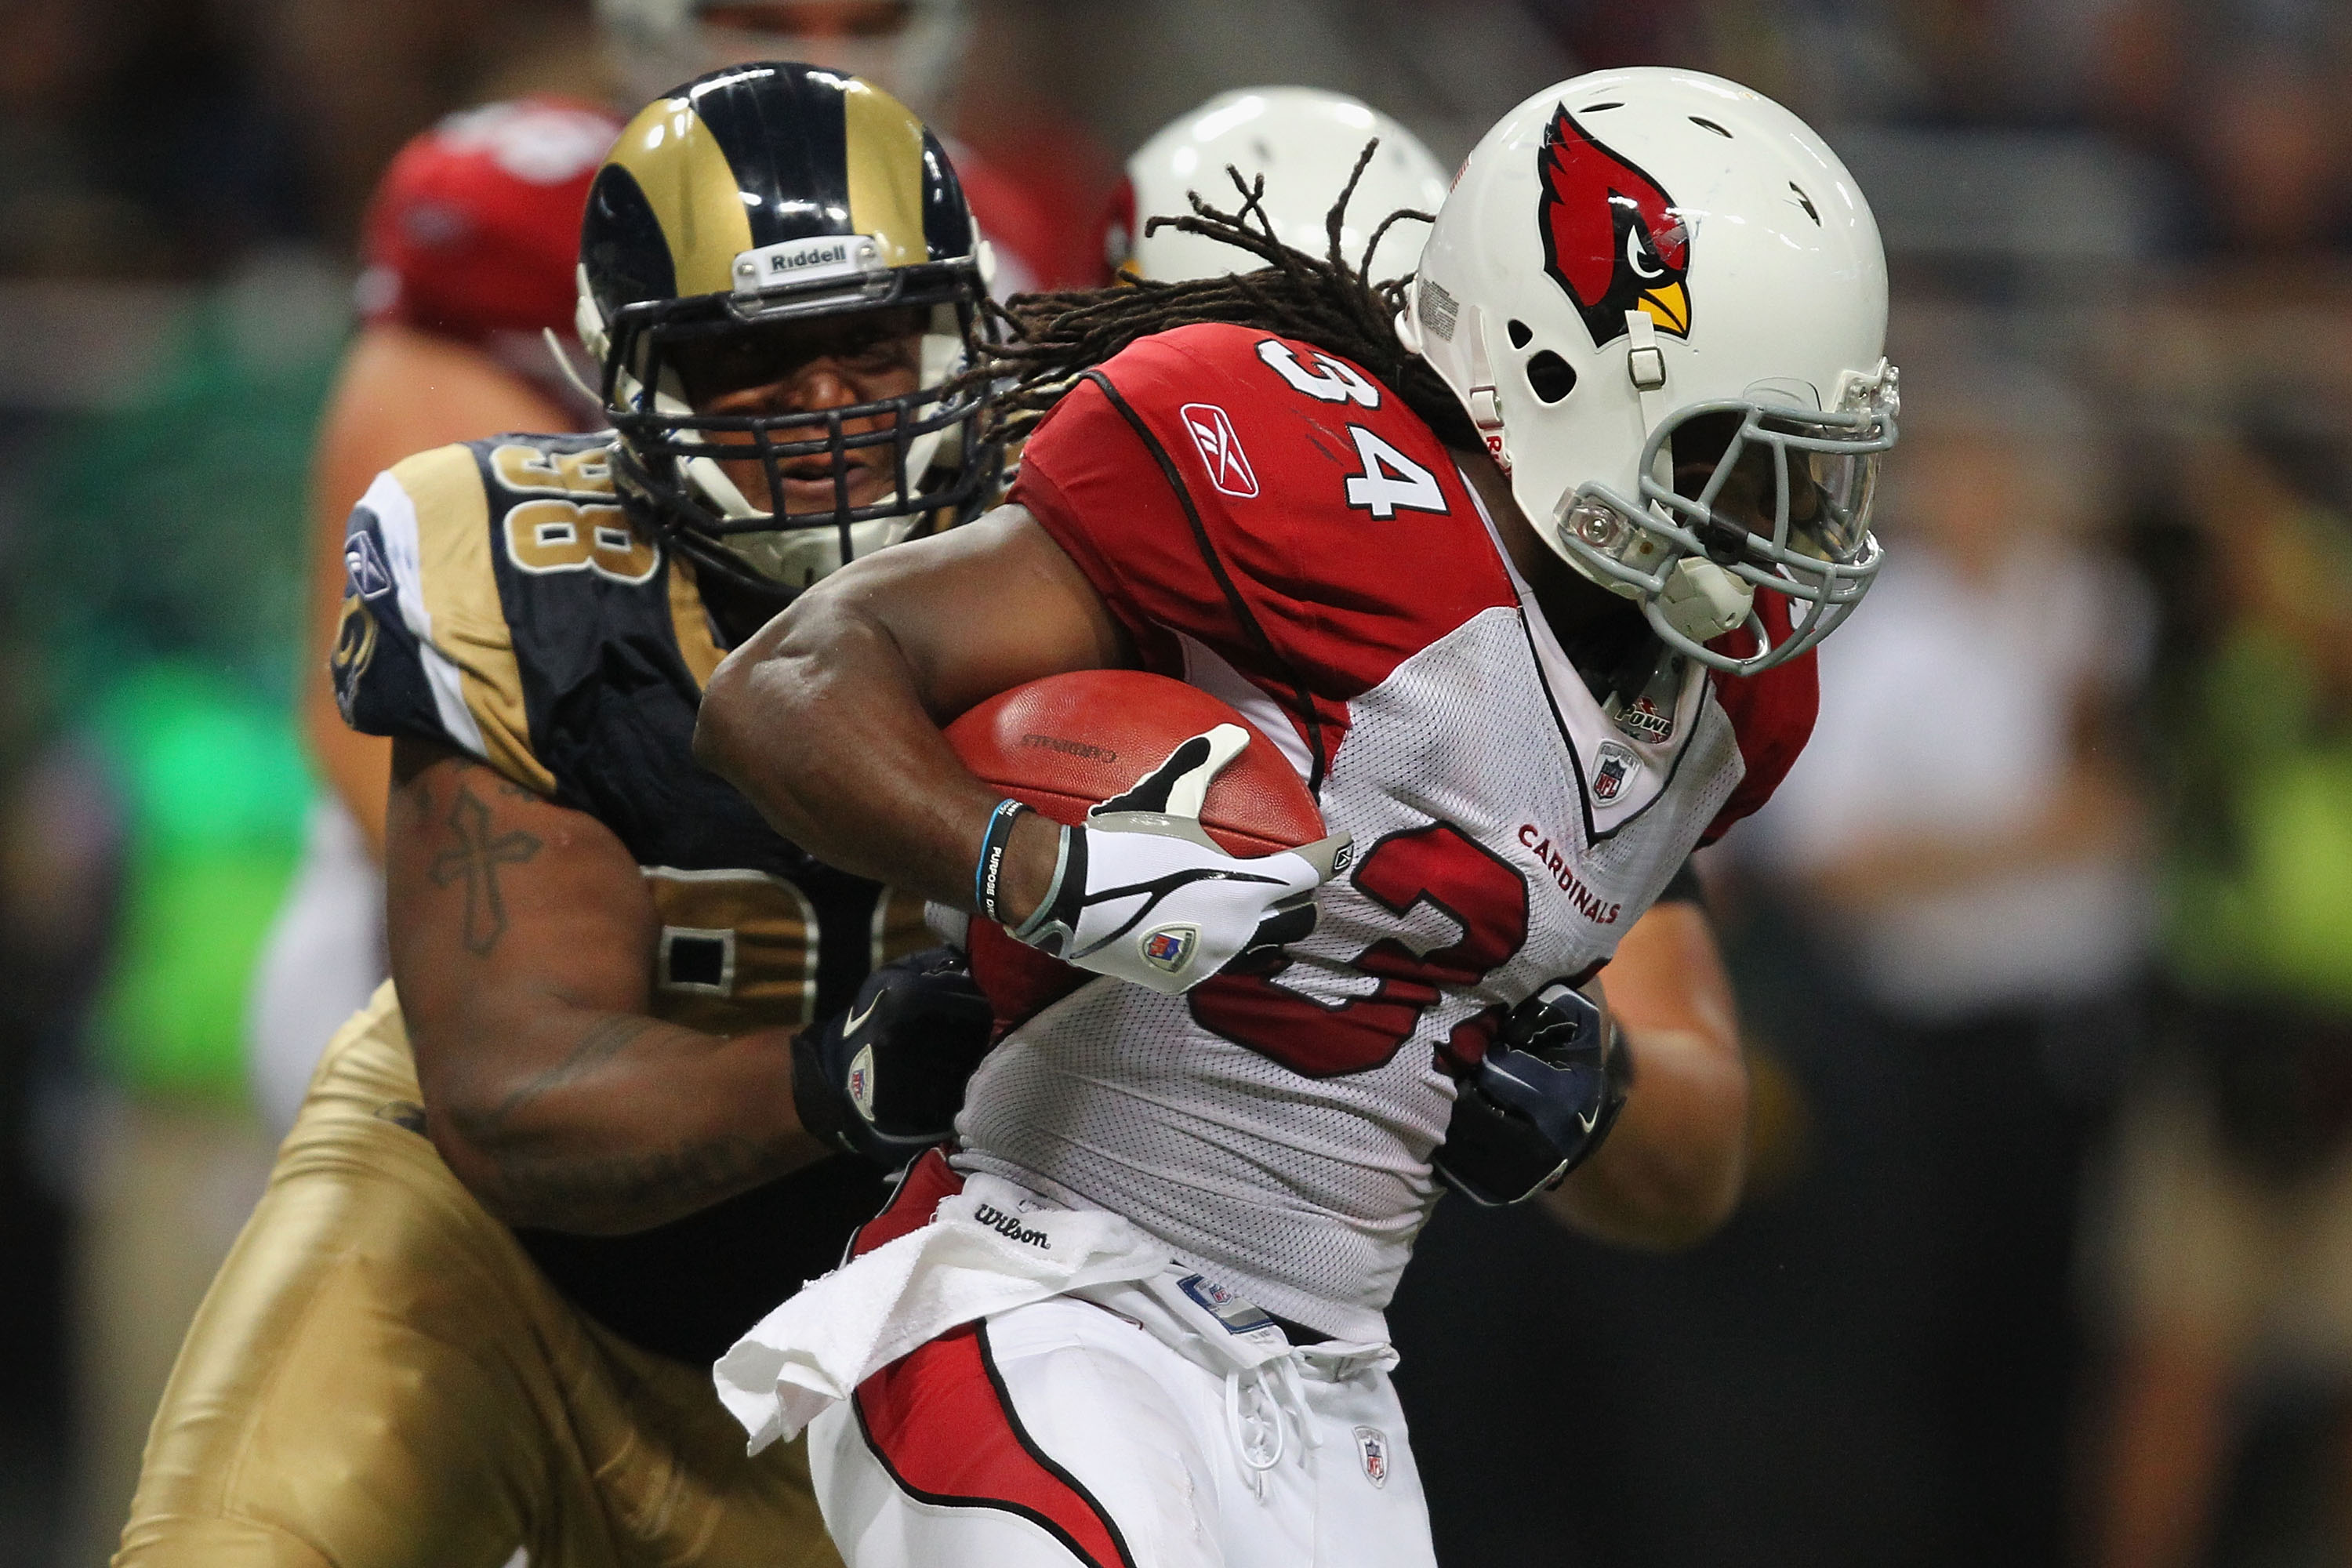 What Are the Latest Arizona Cardinals Playoff Chances?